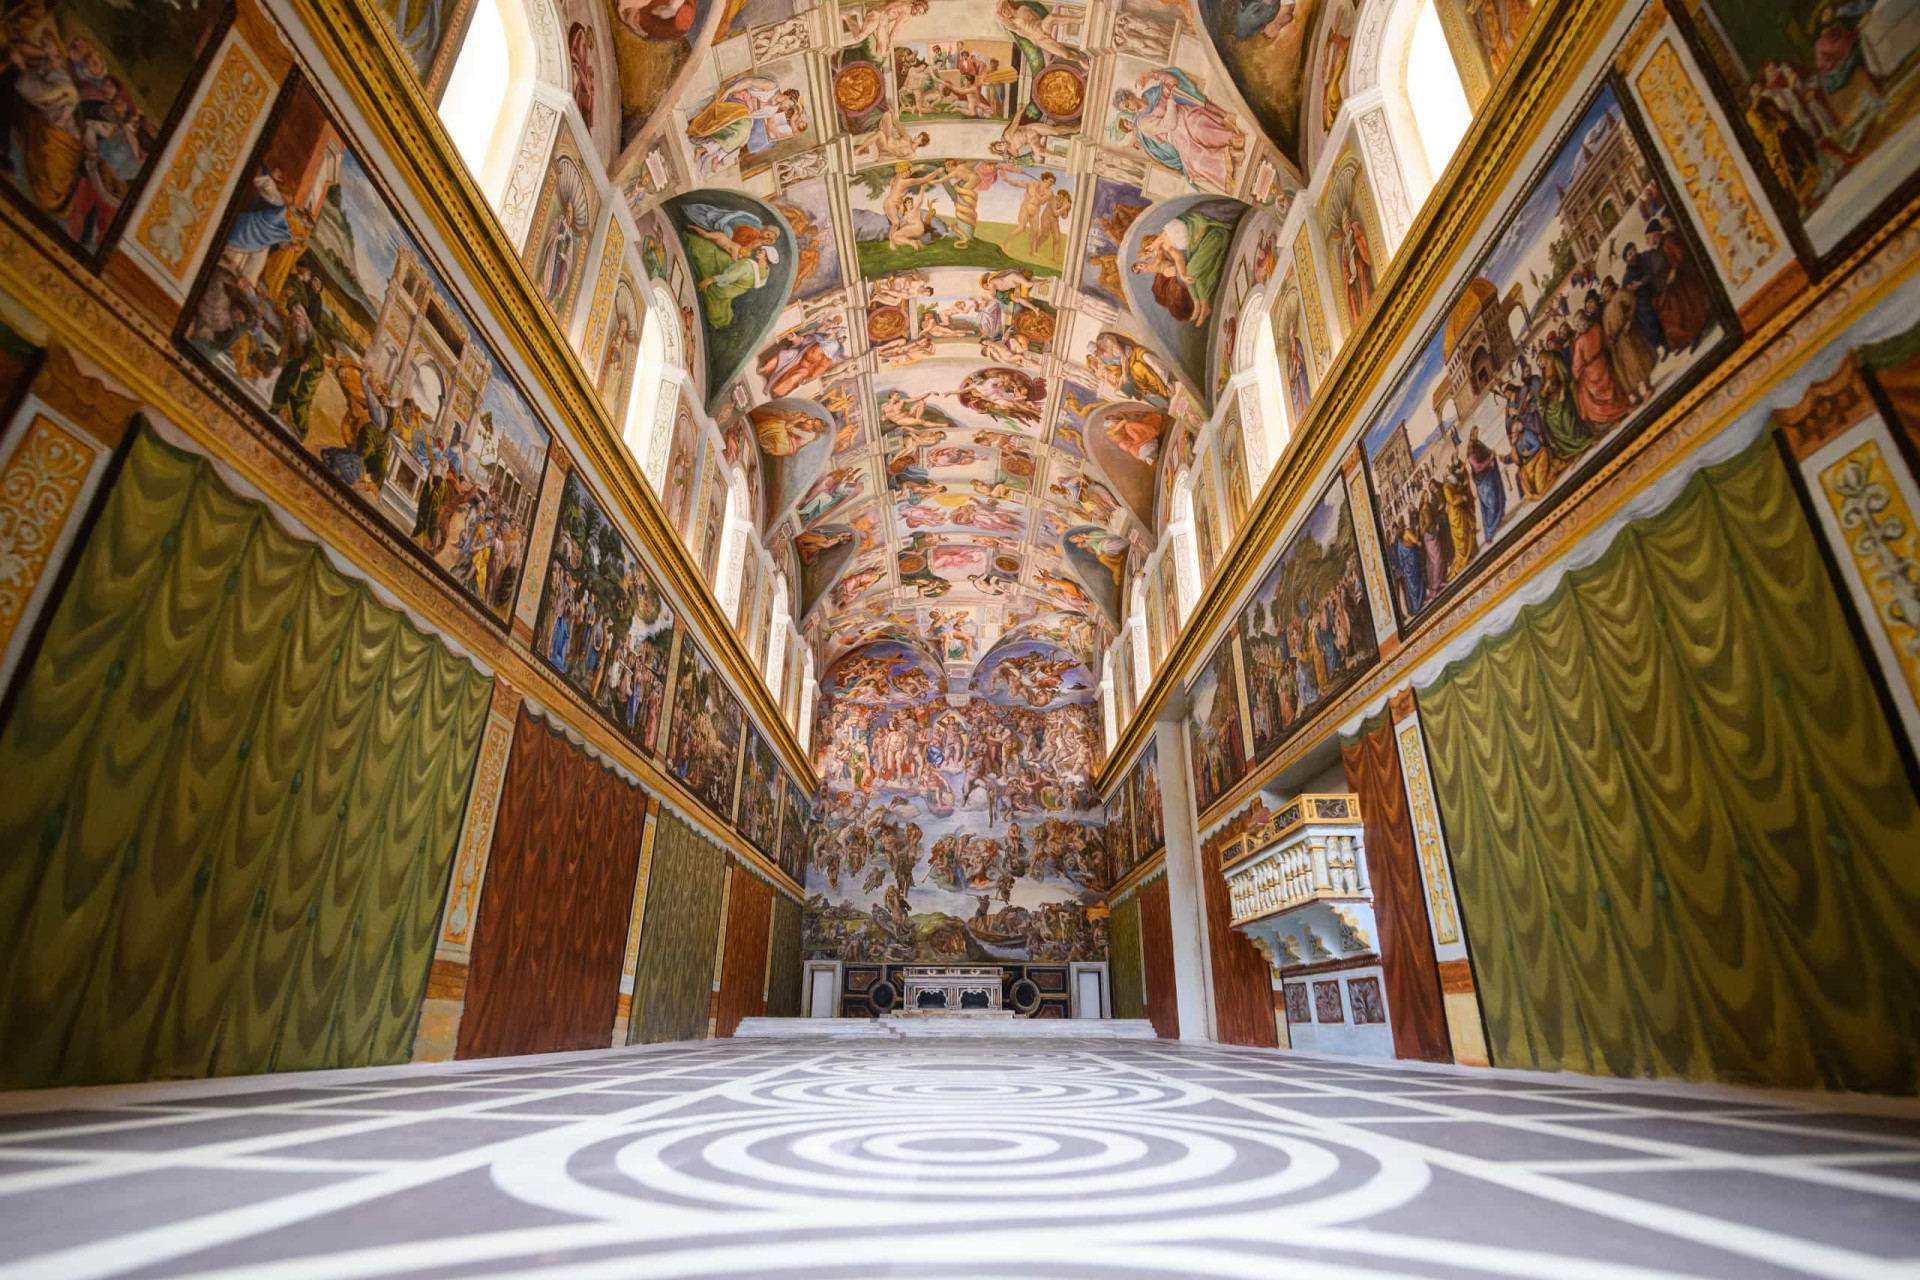 <p>Certain scholars argue that Michelangelo's renowned painting contains a hidden depiction of a human brain within the figure of God. This observation raises questions about the potential symbolic significance behind the artwork. </p>